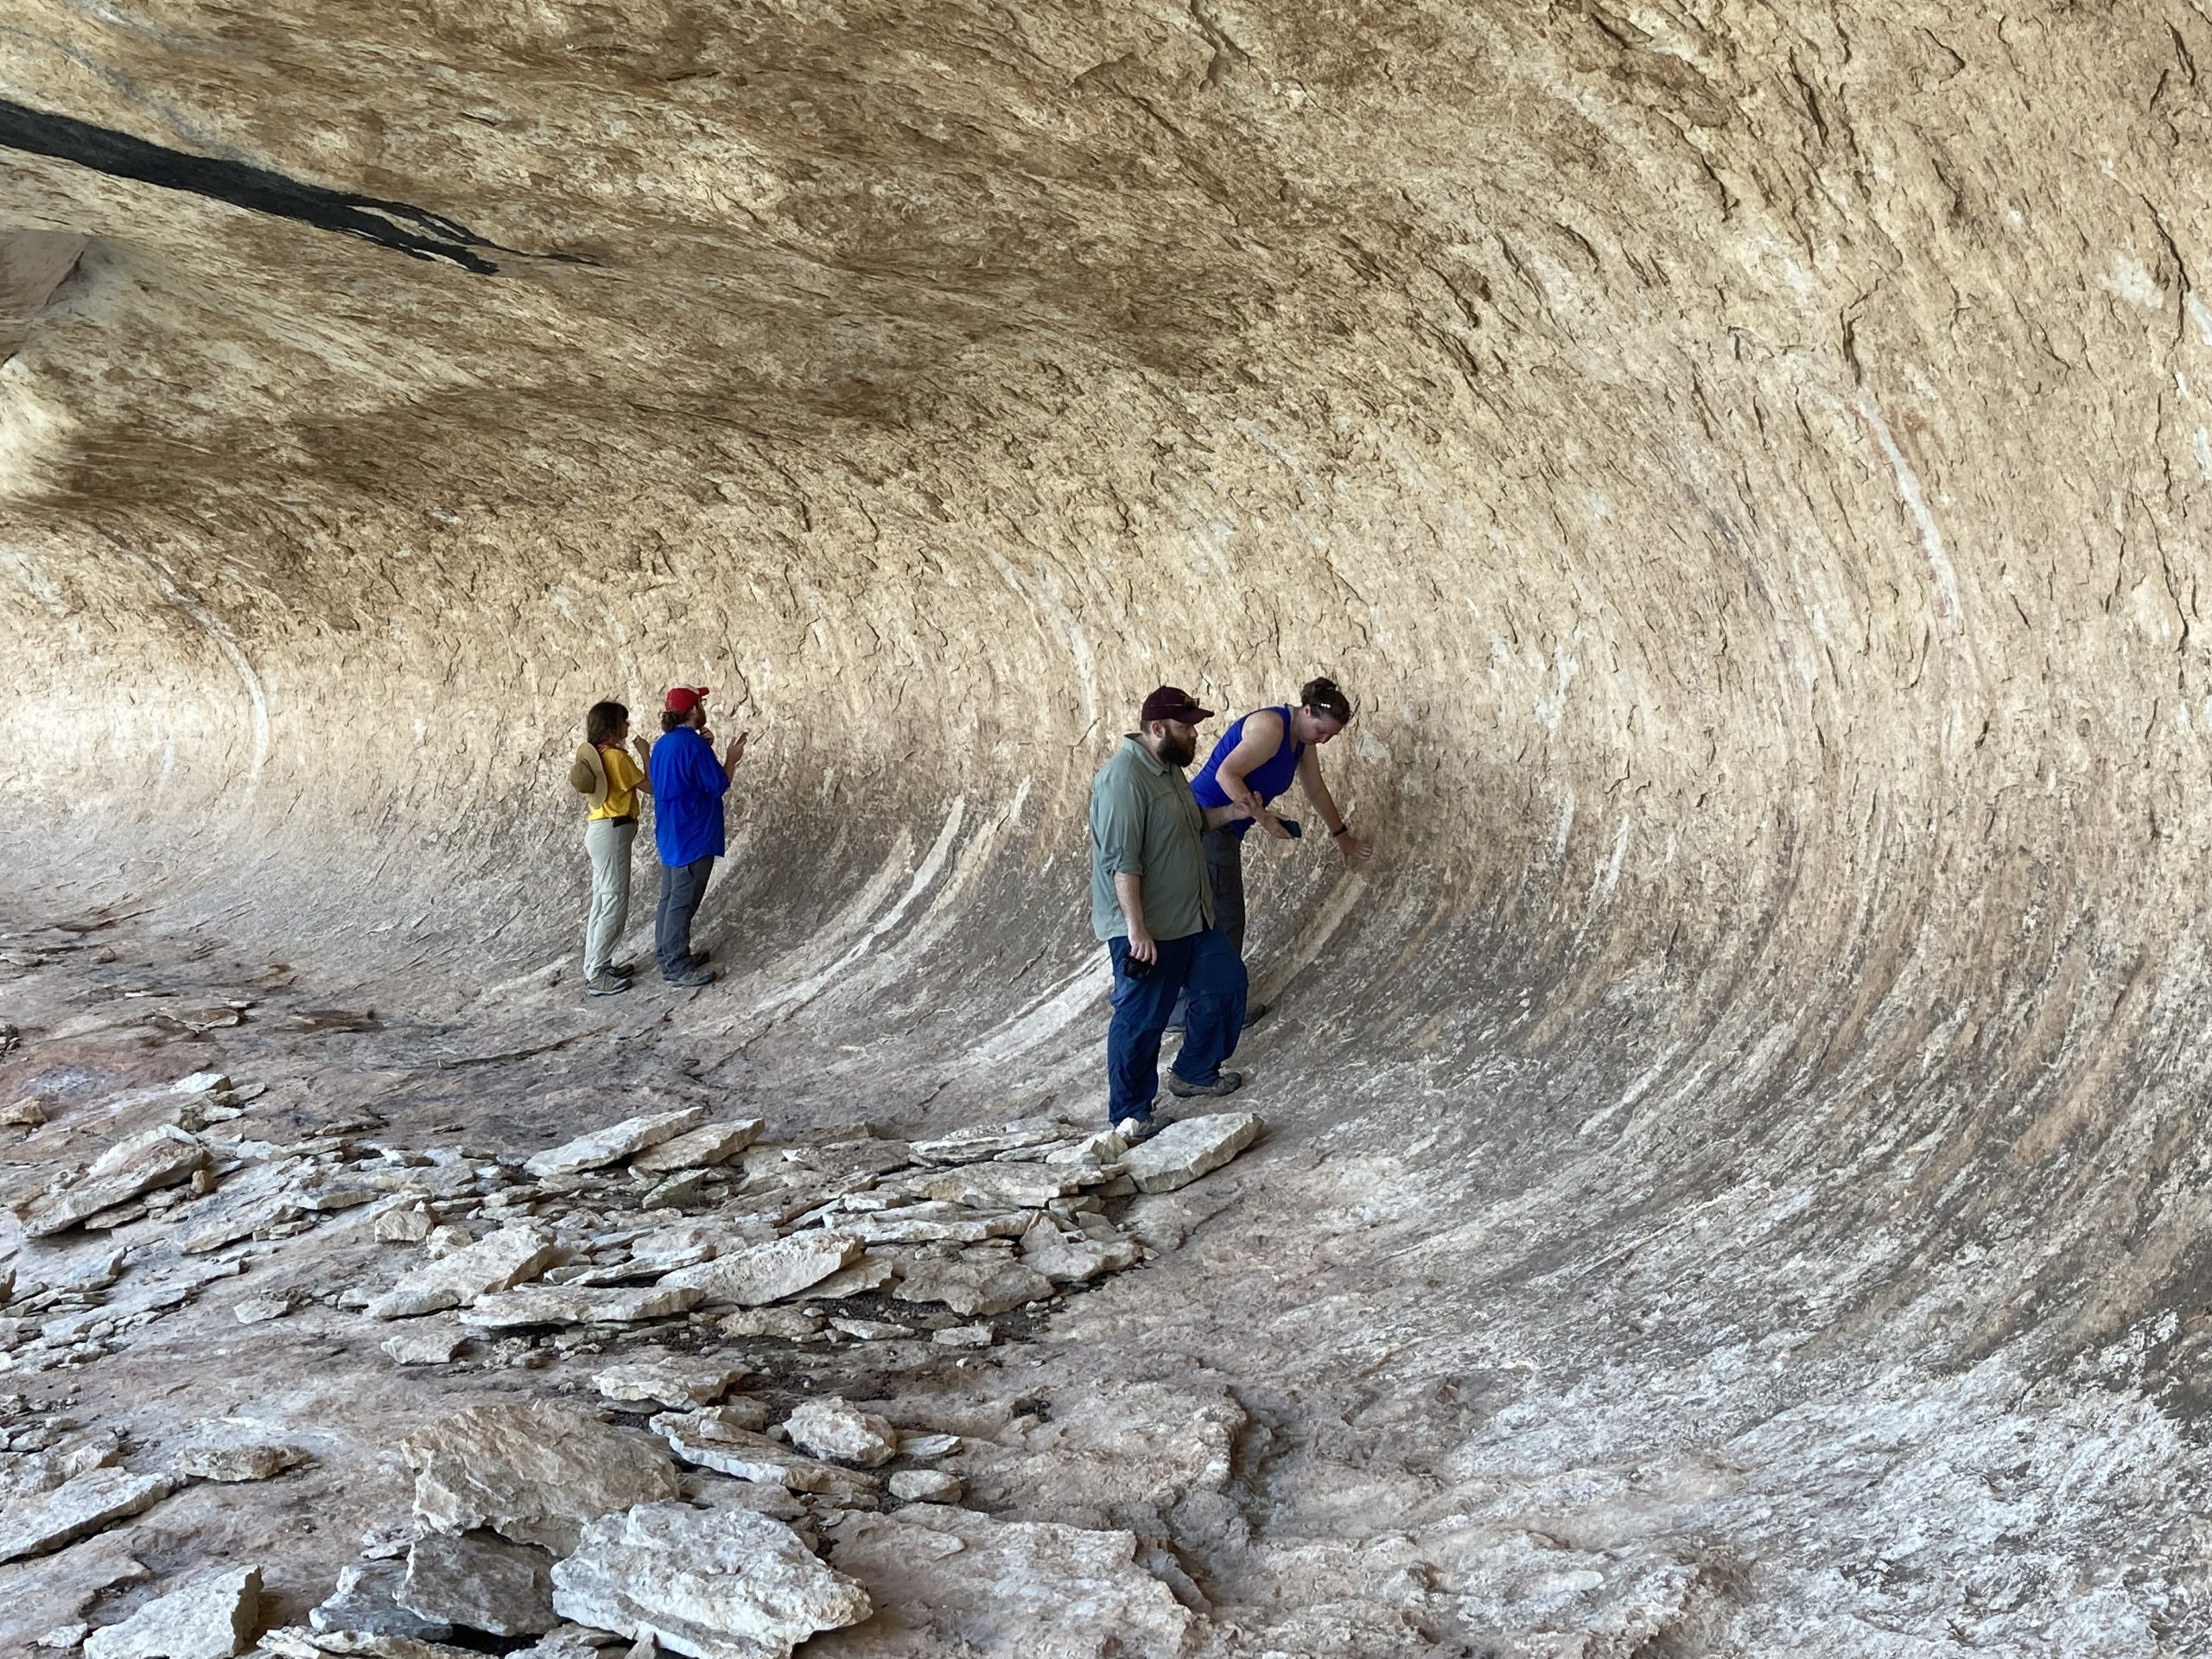 A team of volunteers inspecting a rock art panel with Texas State Master’s student, Jerod Roberts.